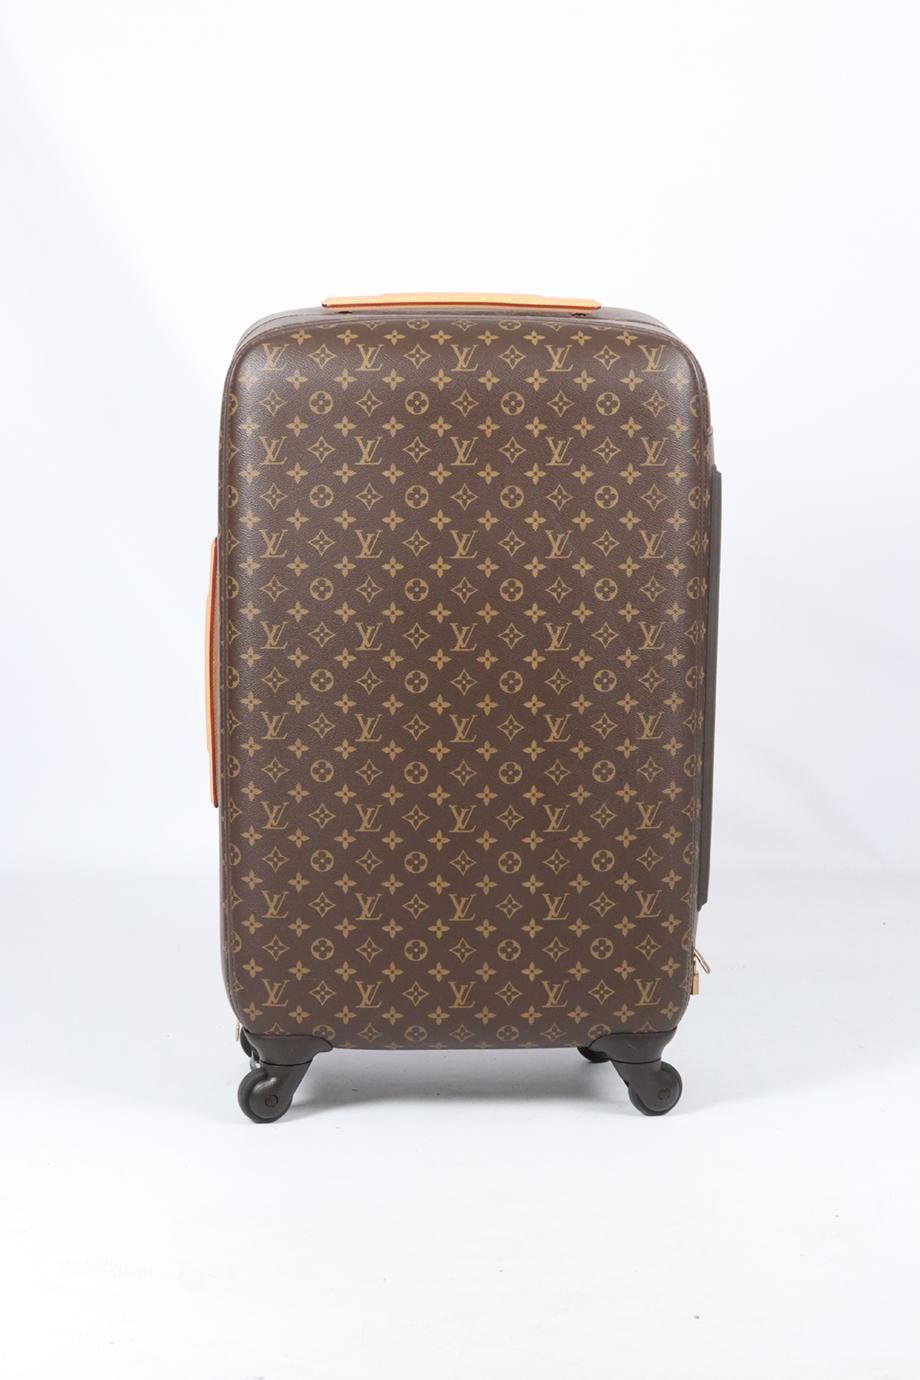 Louis Vuitton Zephyr 70 Monogram Coated Canvas And Leather Suitcase In Good Condition For Sale In London, GB